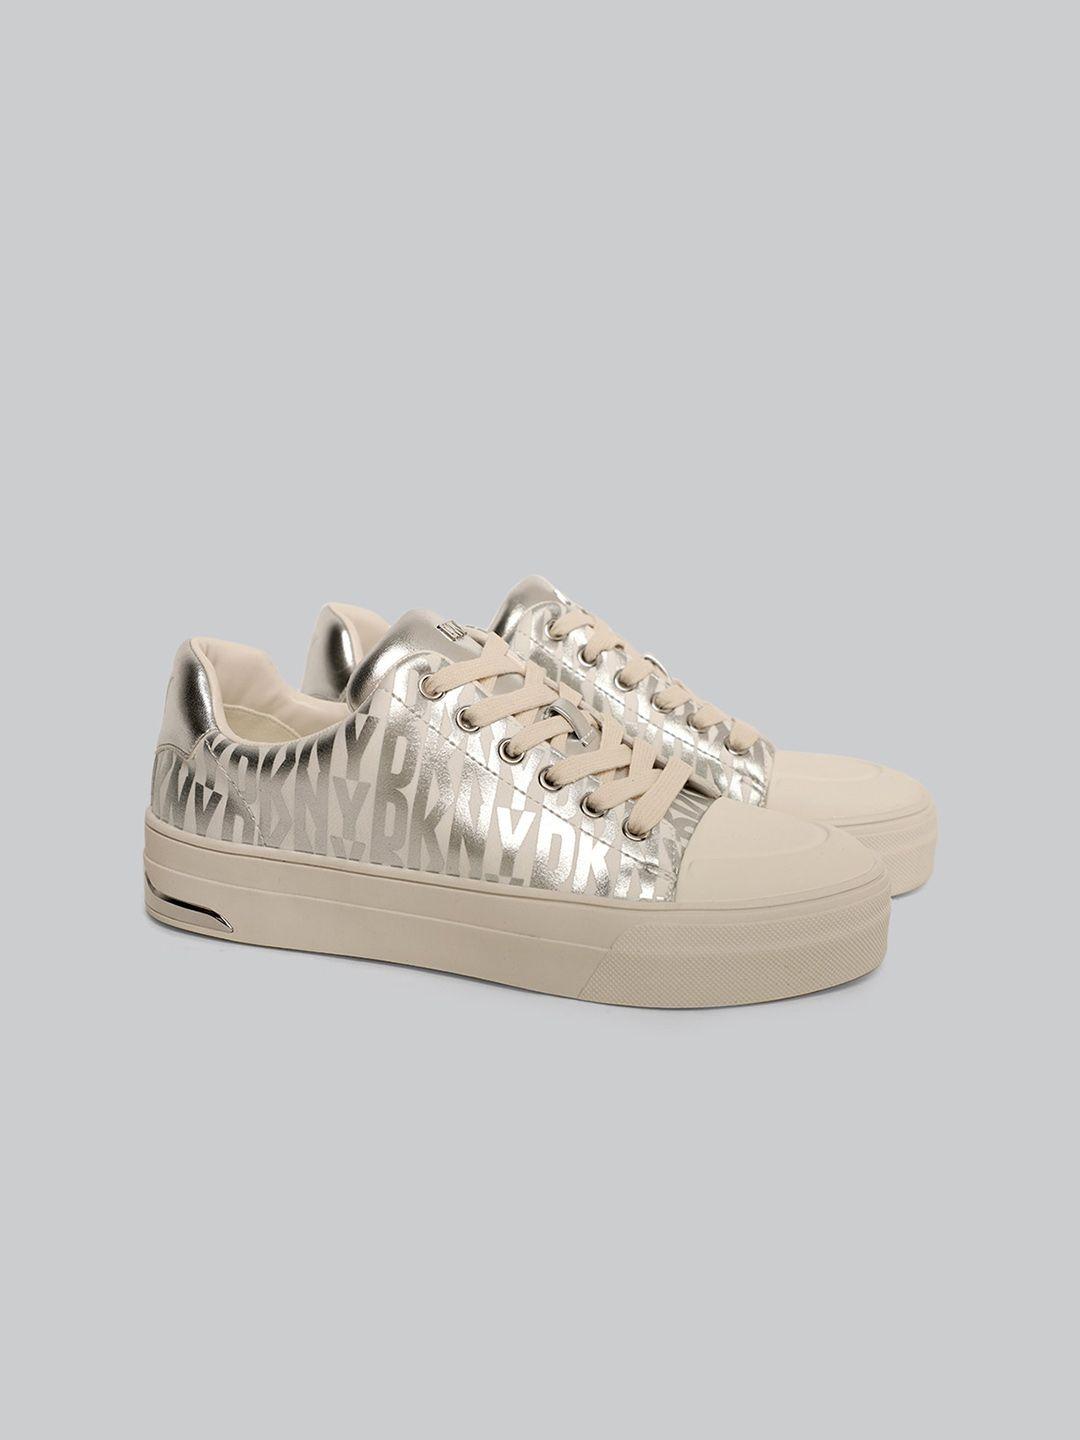 dkny women textured comfort insole lace-up sneakers